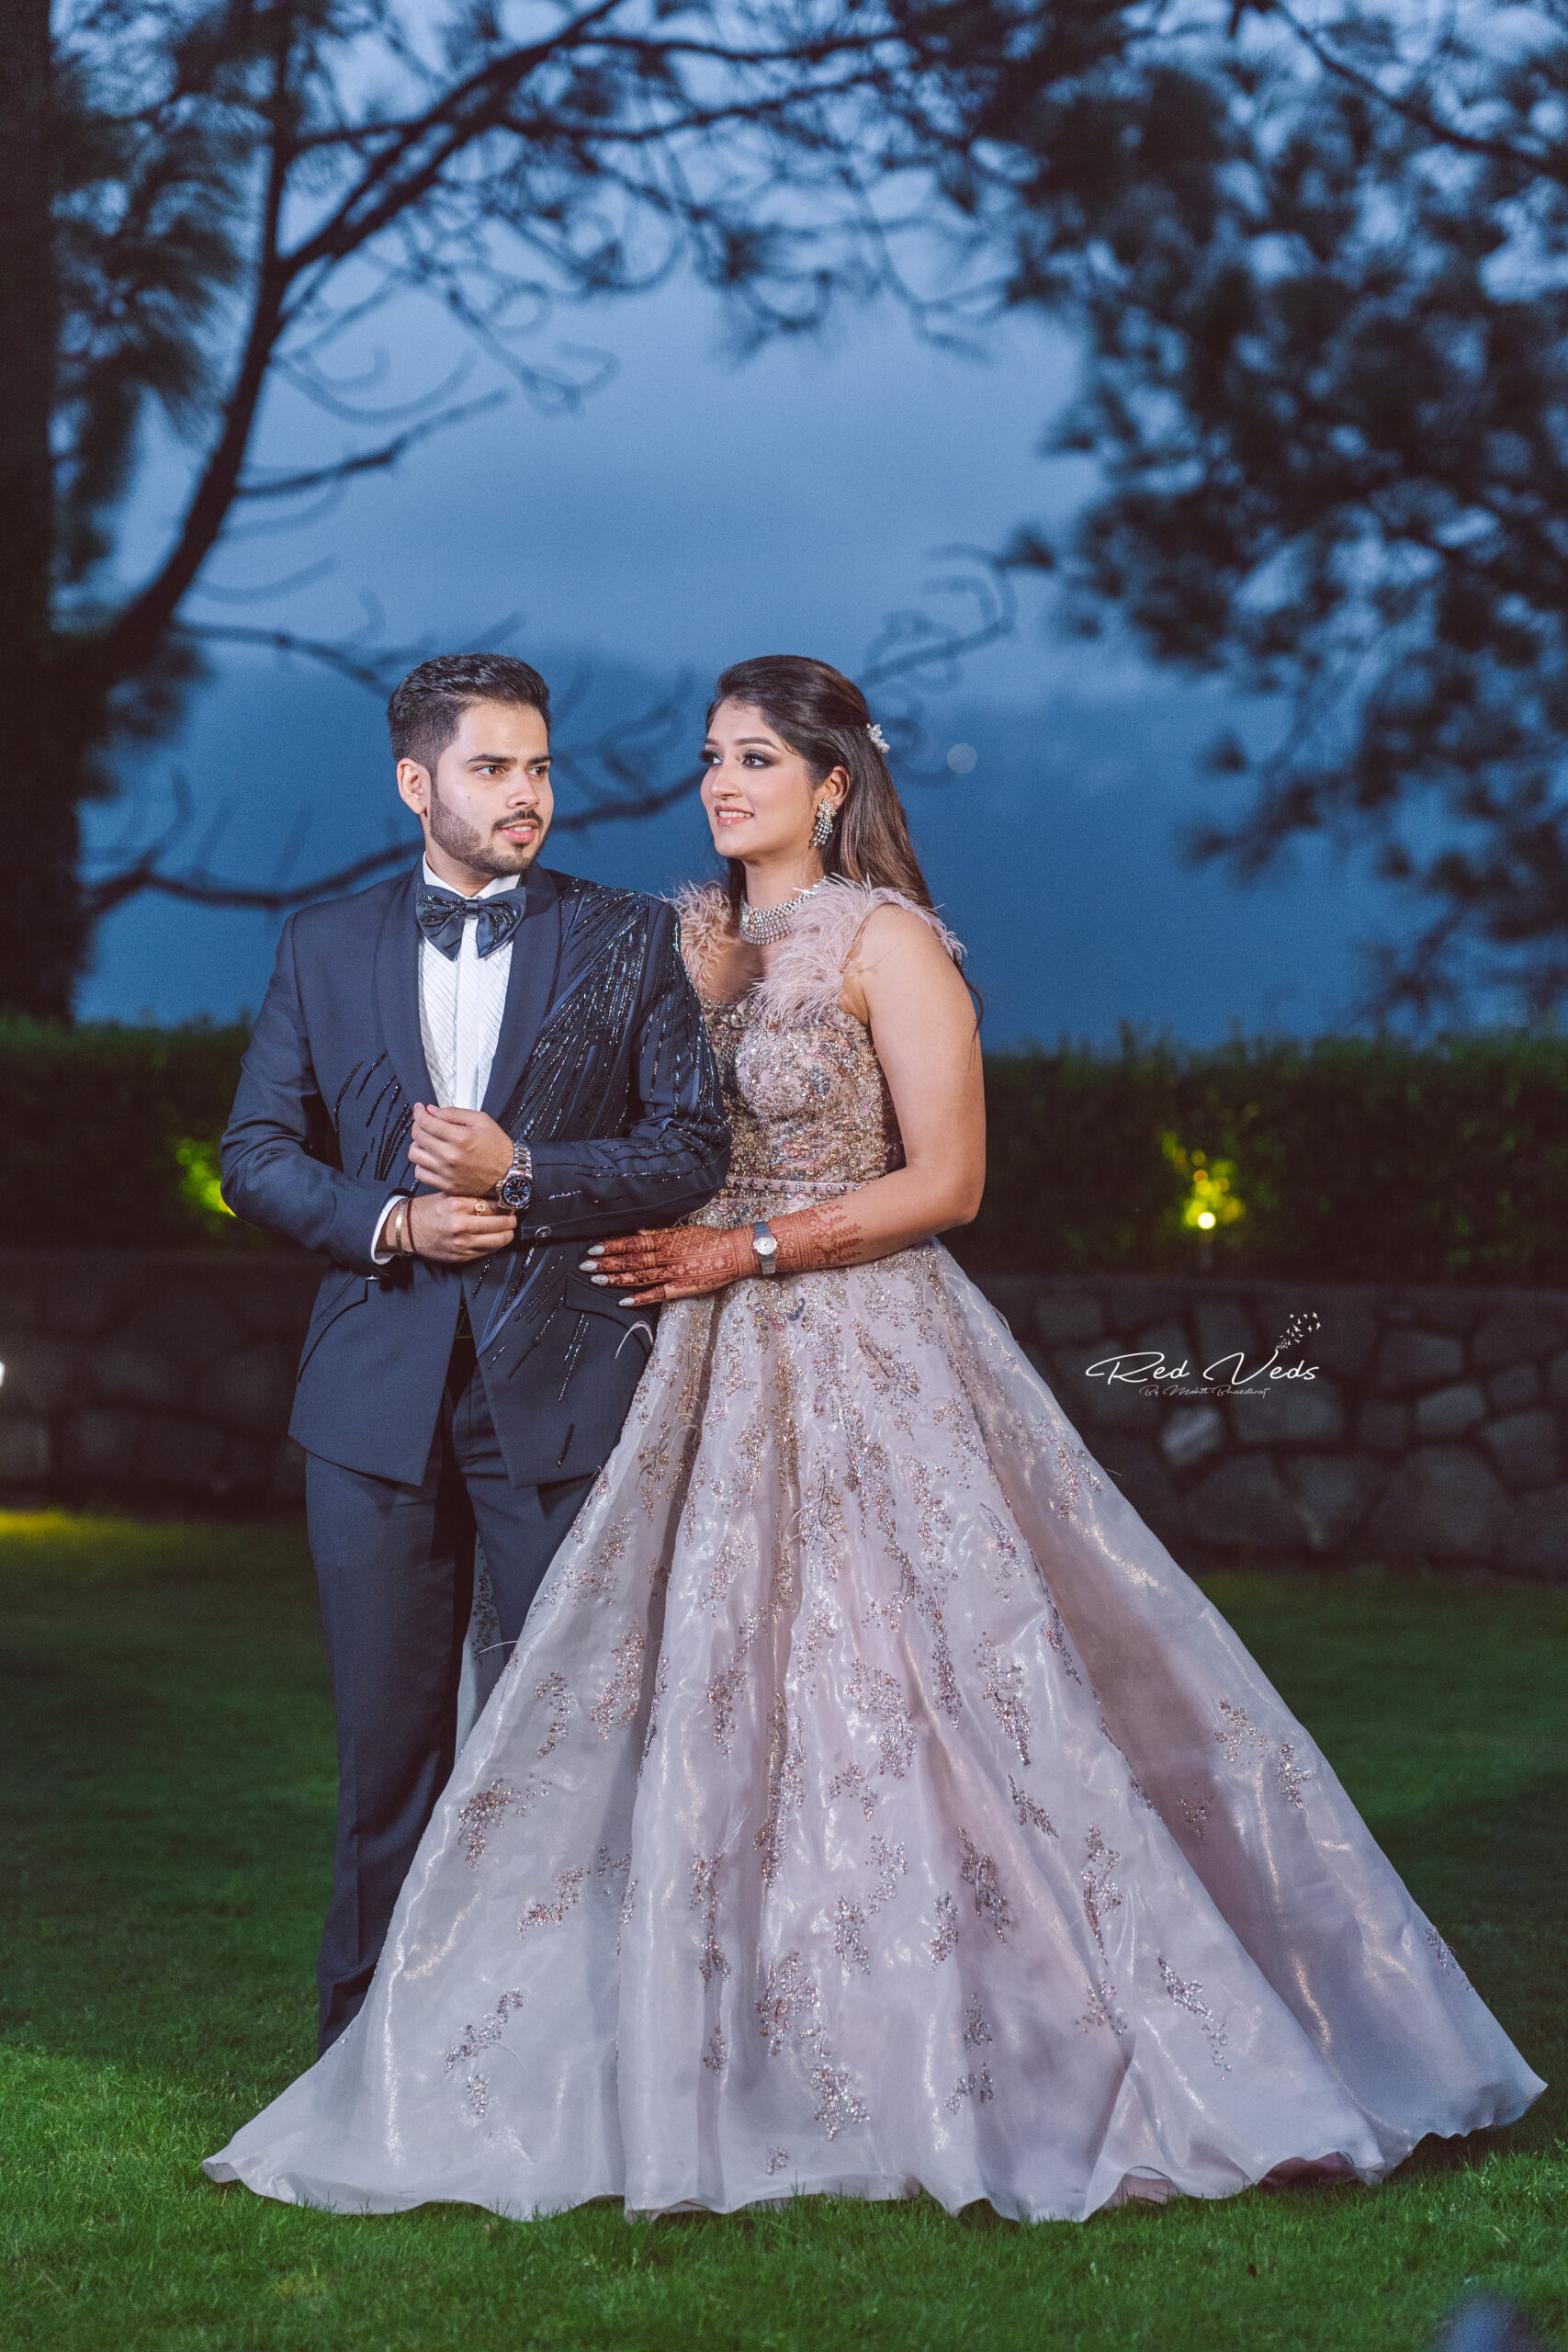 How to Pose for Bridal Photos & Wedding Portraits With Confidence